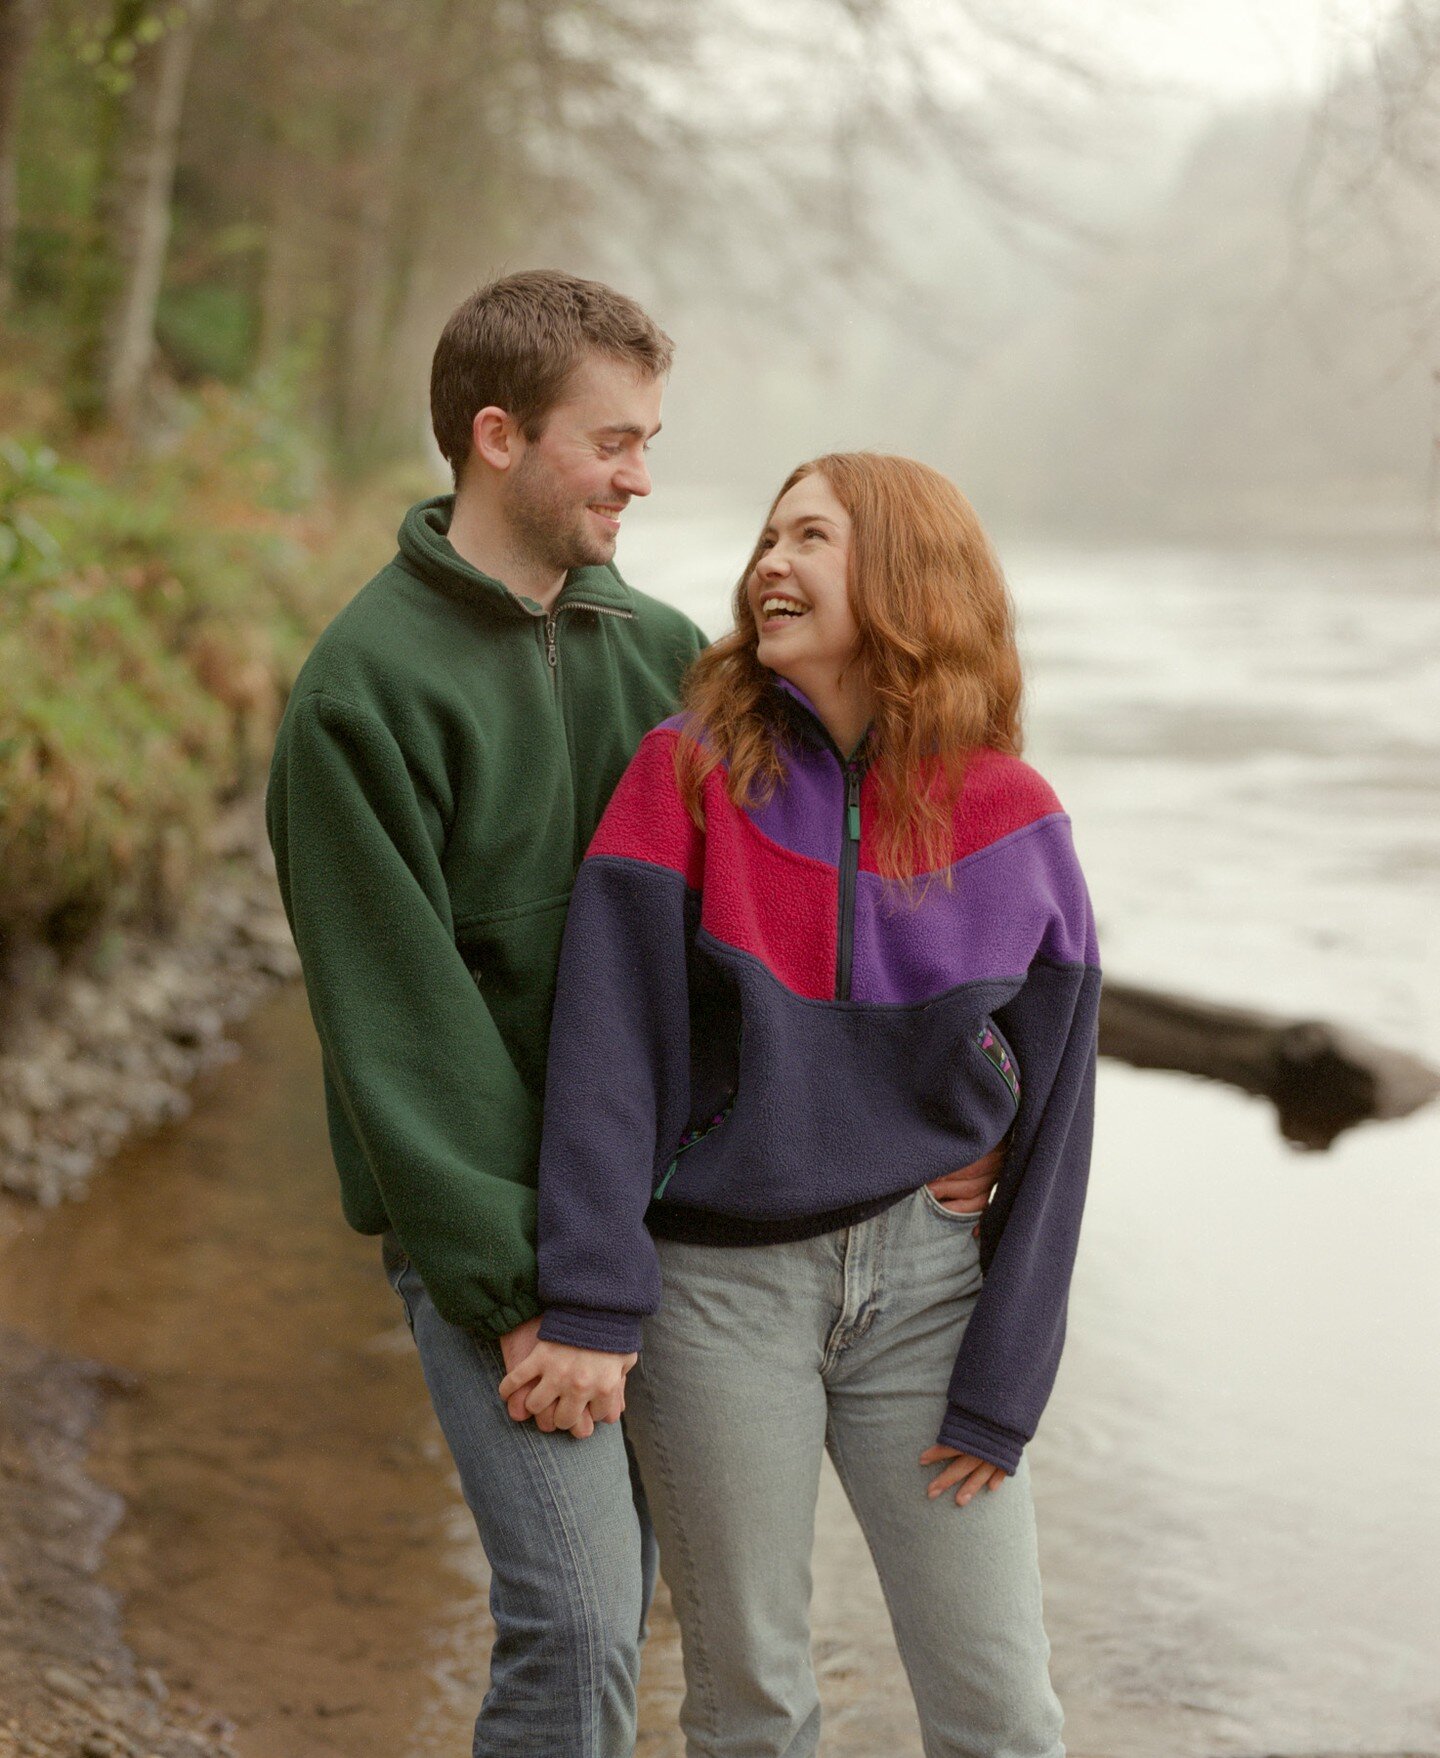 Hannah &amp; Ewan on 120 film on a rather misty day in April.